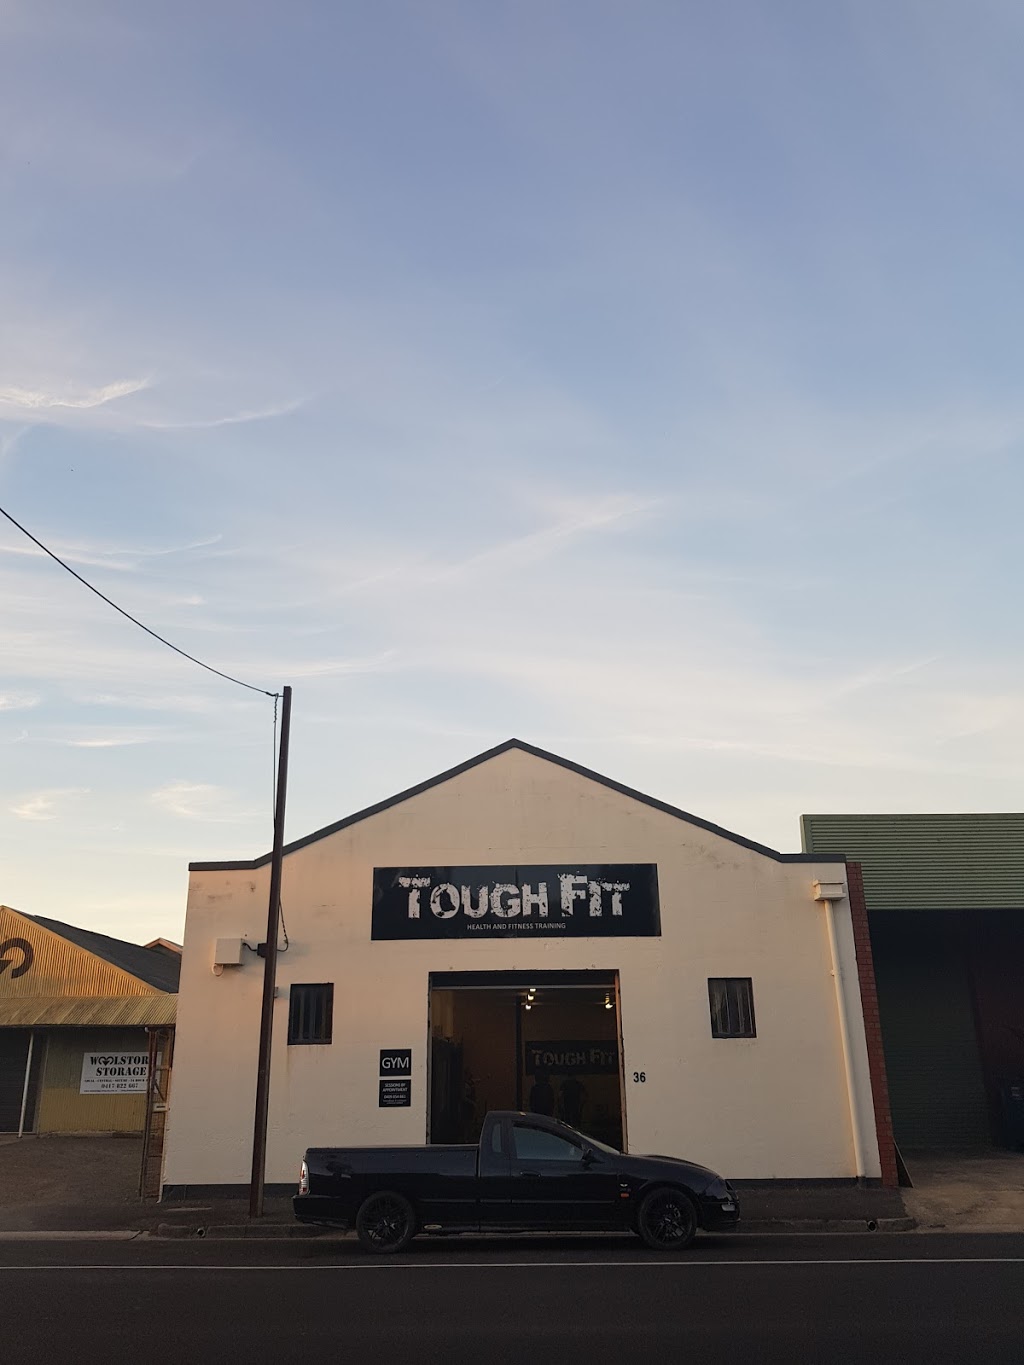 Tough Fit Health and Fitness Training | health | 36 Margaret St, Mount Gambier SA 5290, Australia | 0409854861 OR +61 409 854 861